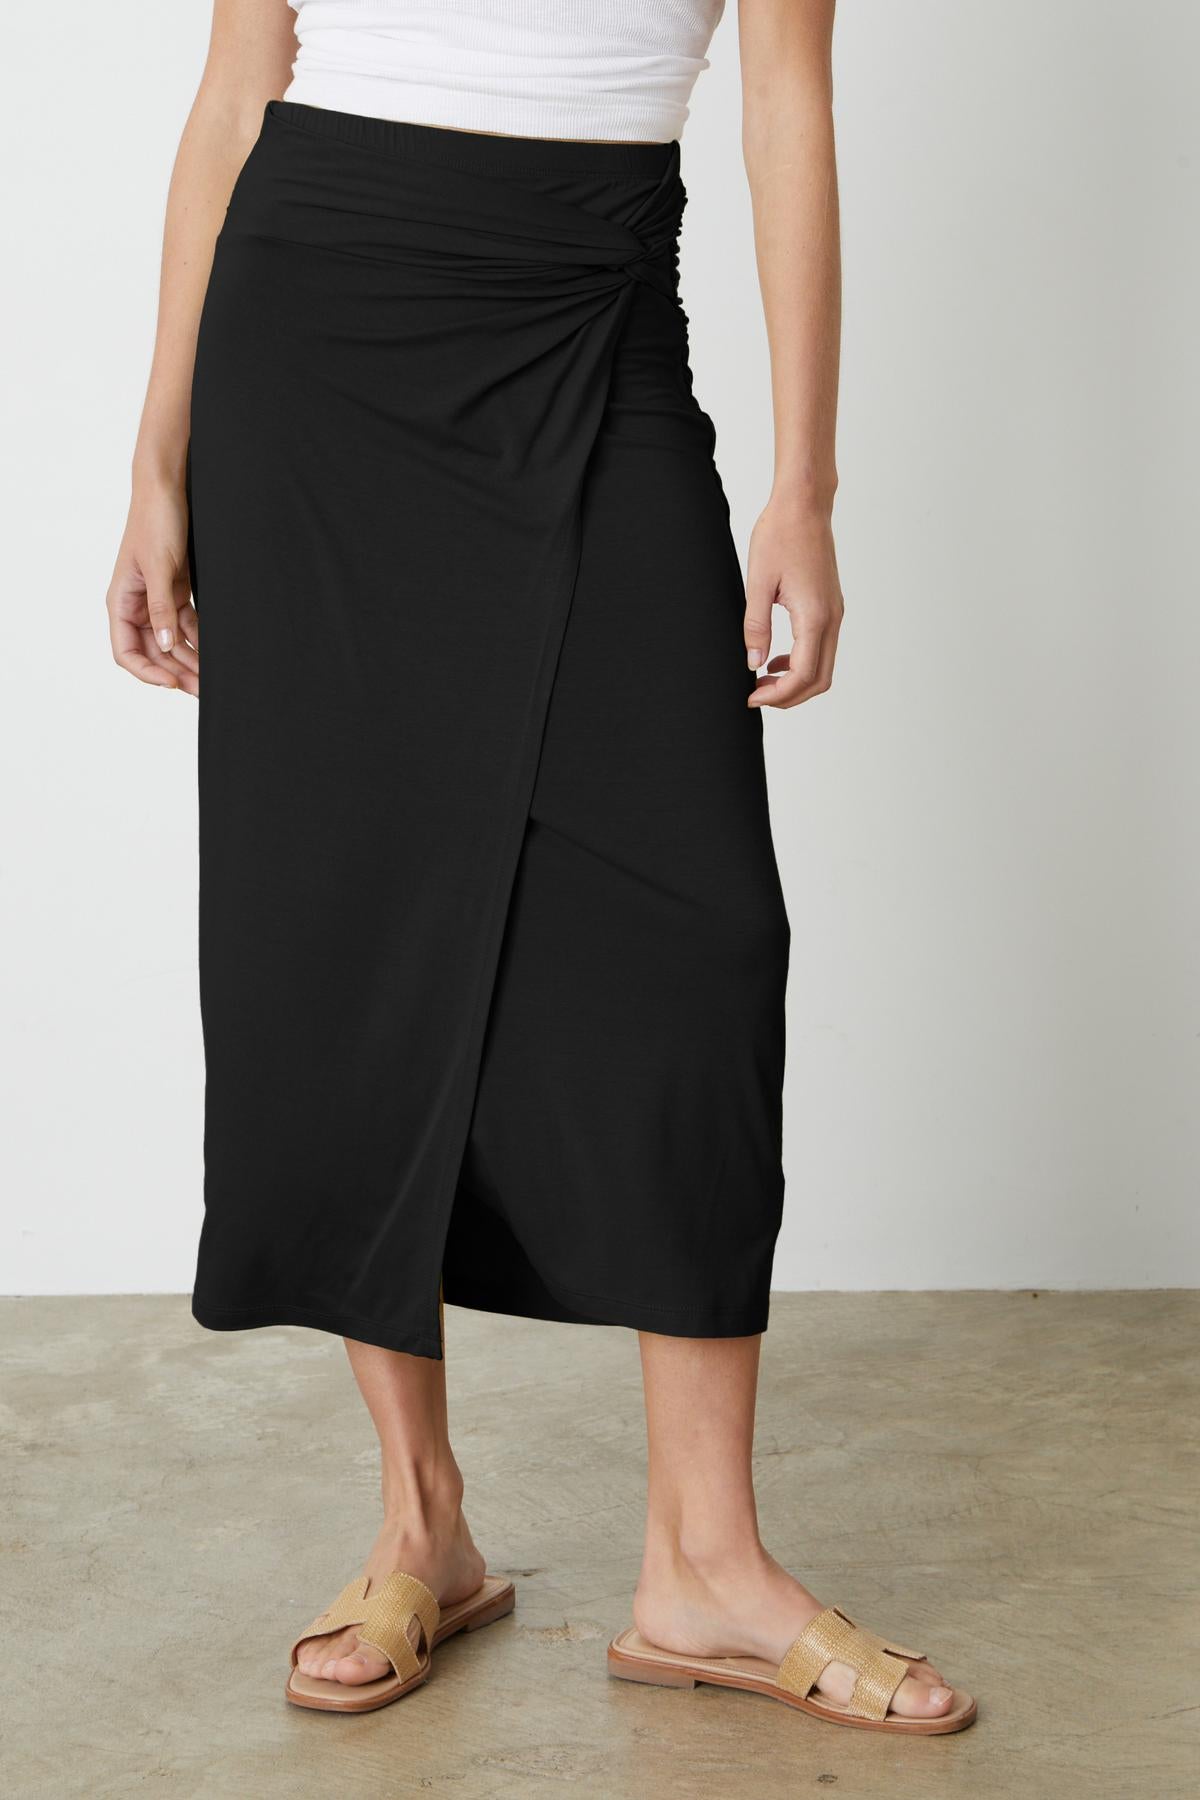 A woman wearing the Velvet by Graham & Spencer SHAE TWIST FRONT SKIRT and white sandals.-35211099799745